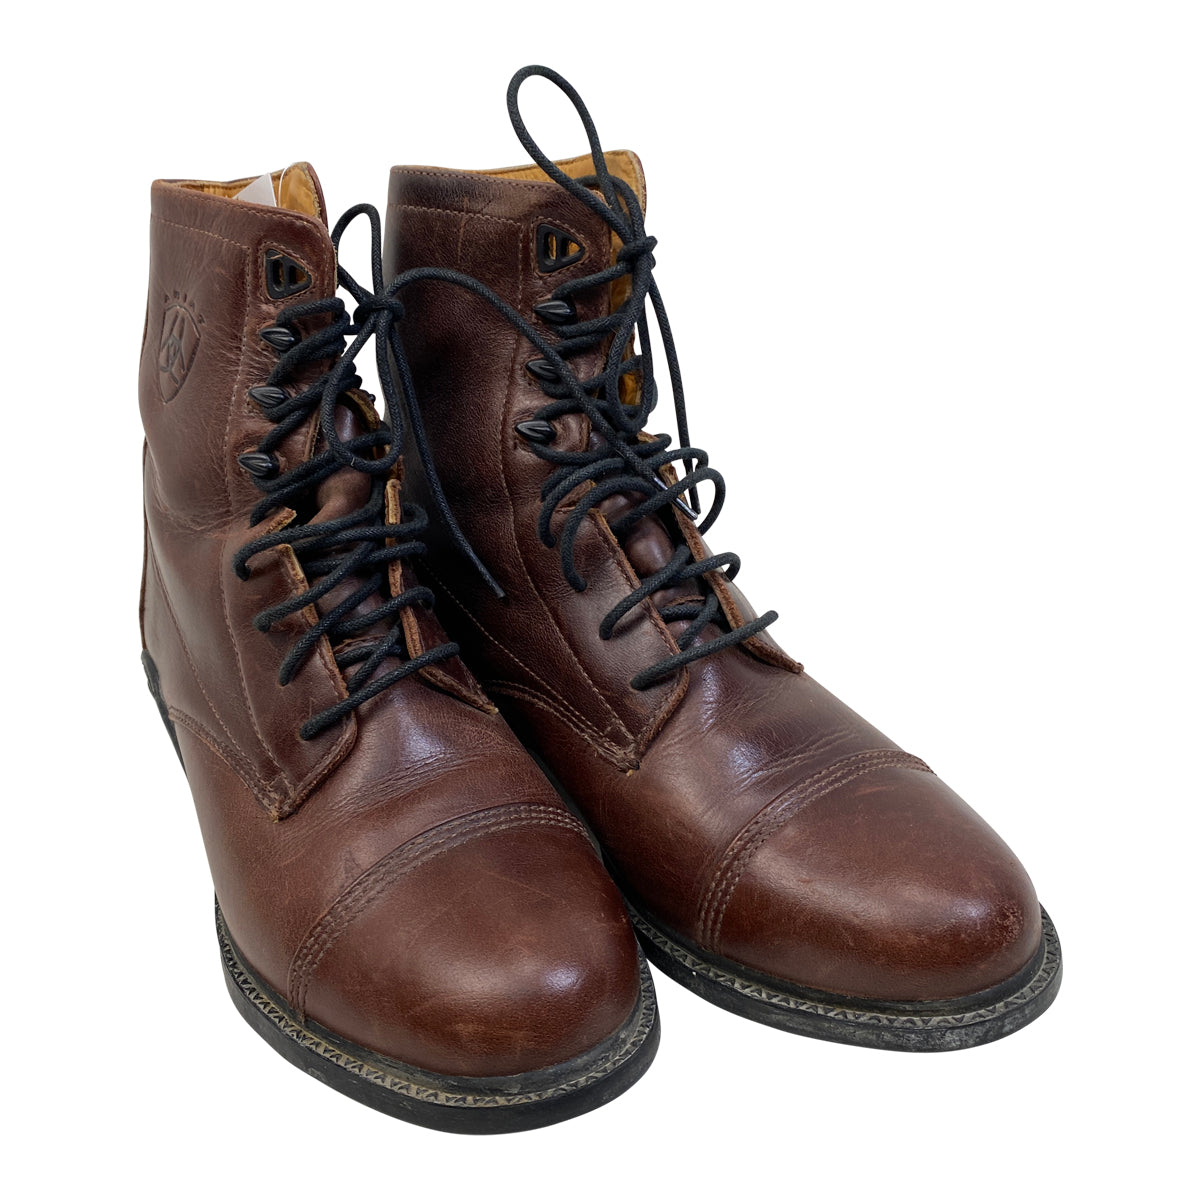 Ariat 'Heritage' Lace Up Paddock Boot in Brown